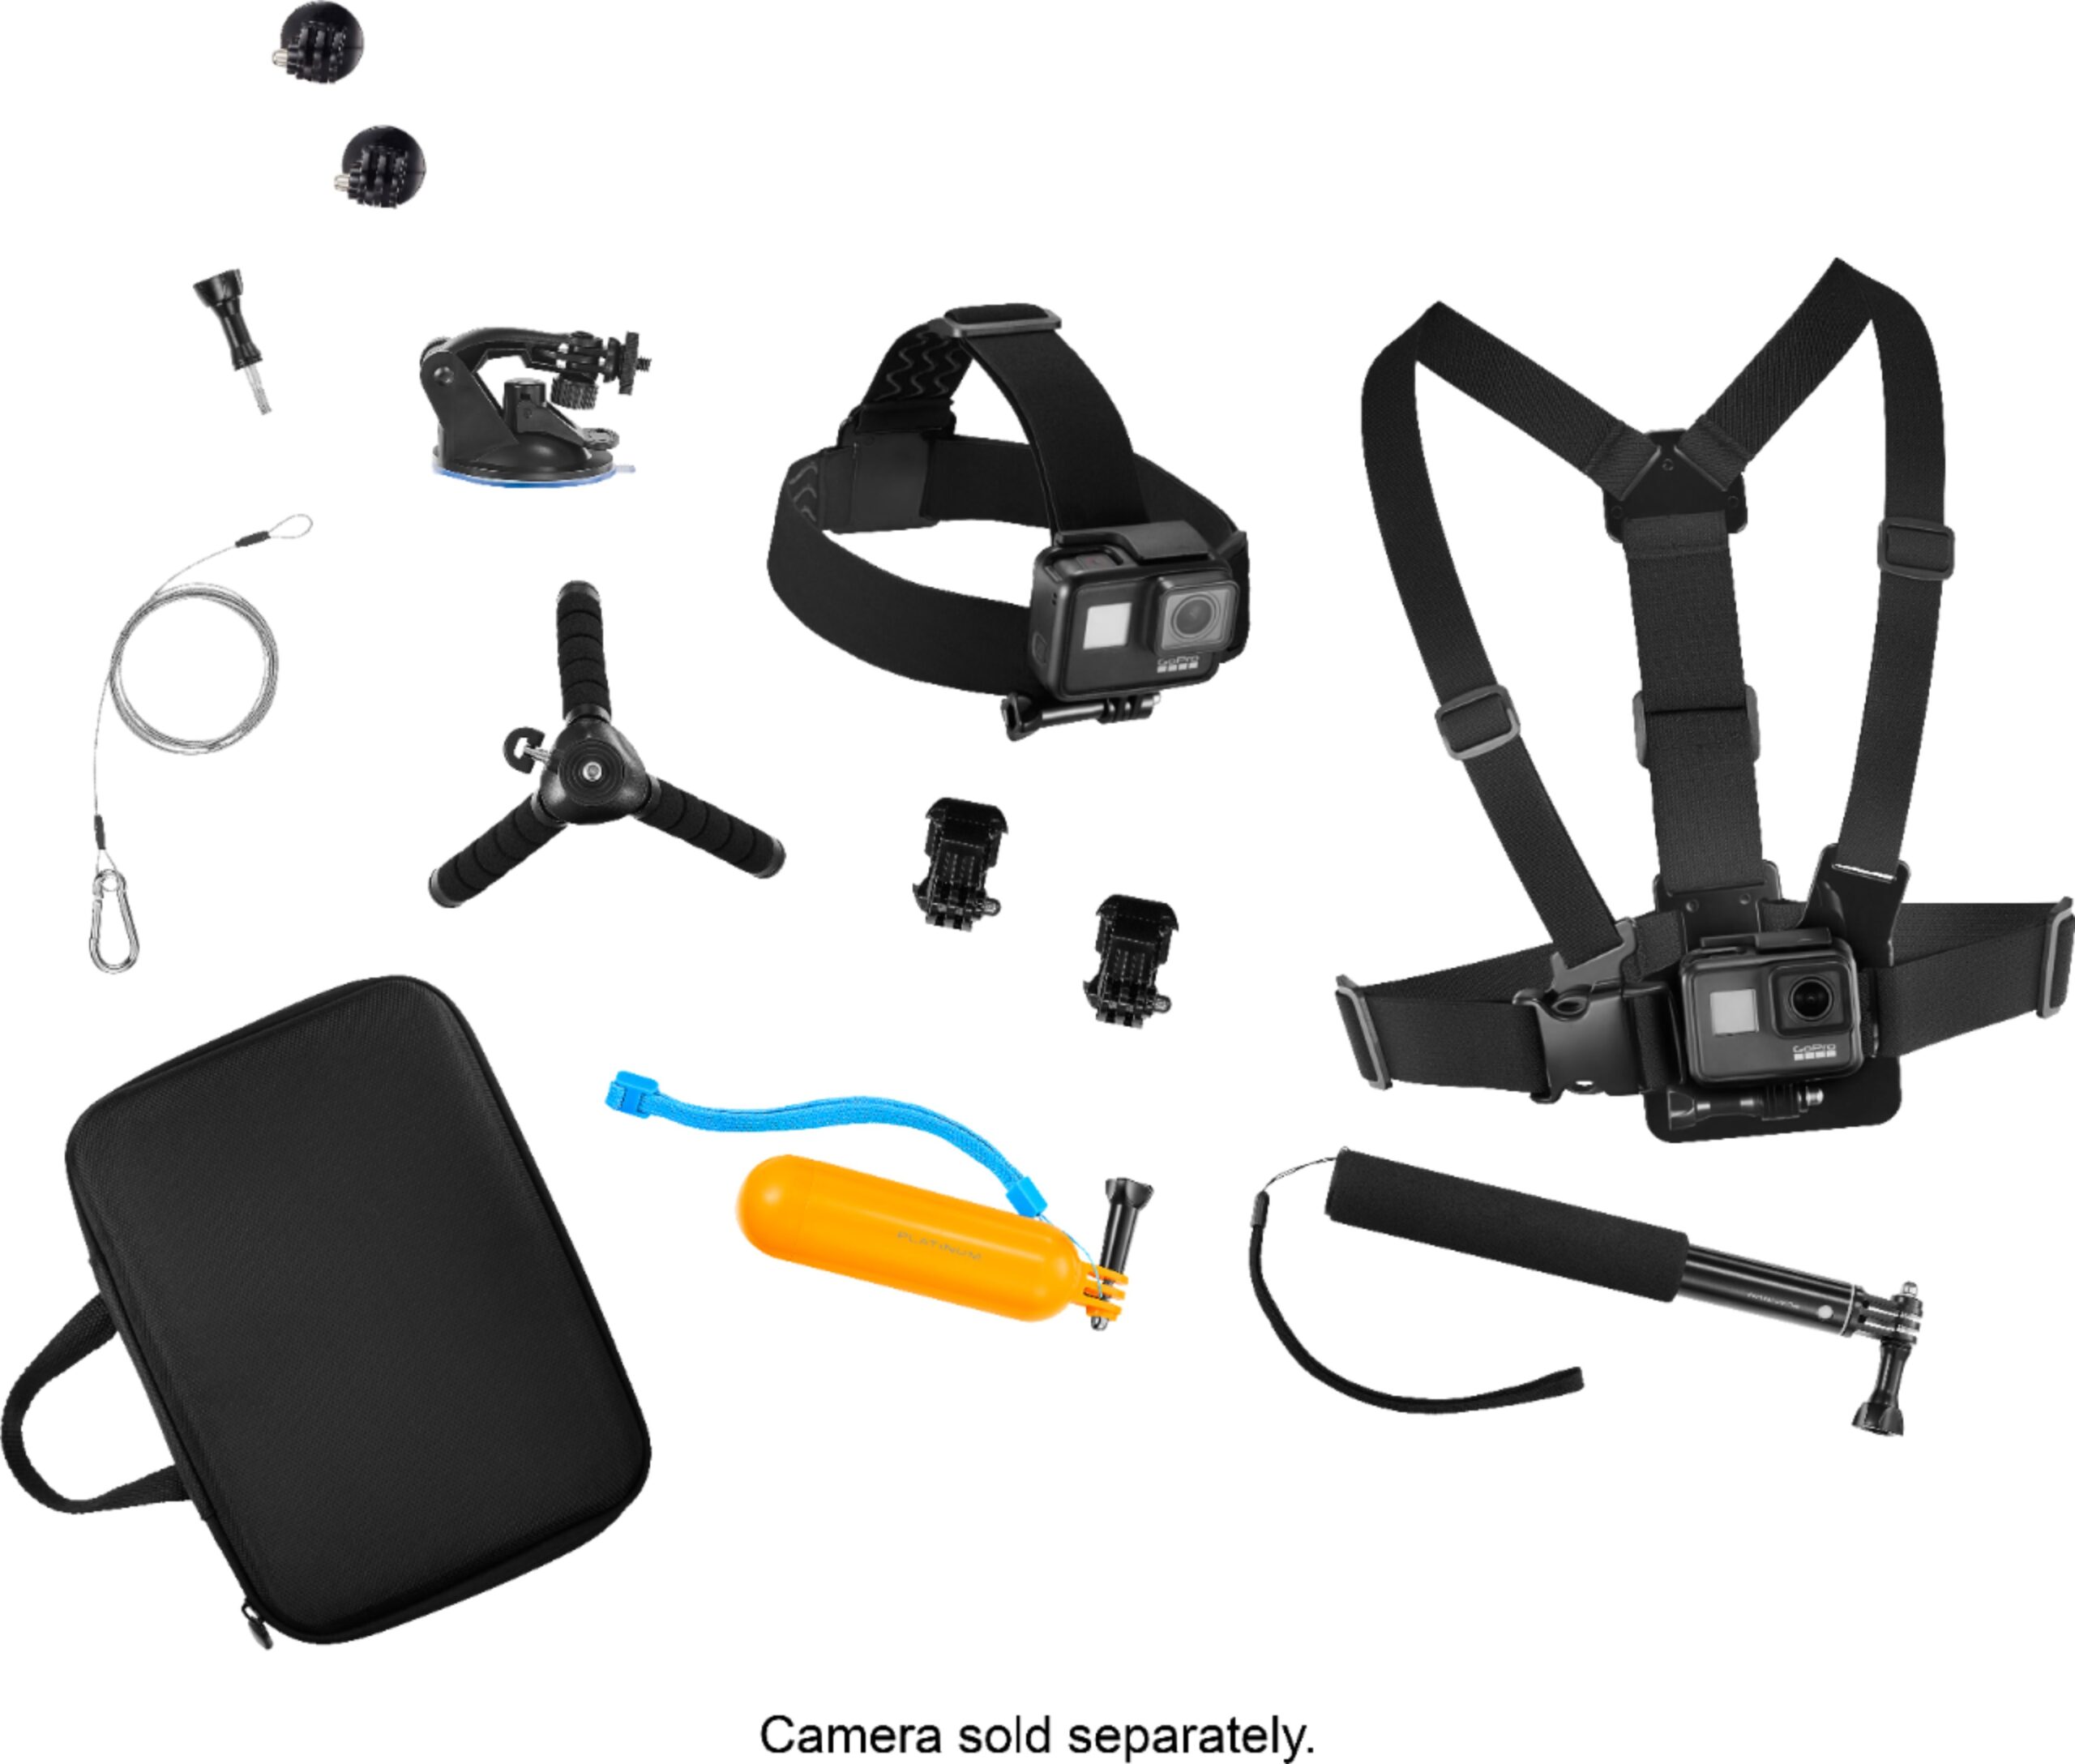 Get Your Adventure On With Top-Quality GoPro Cameras And Accessories